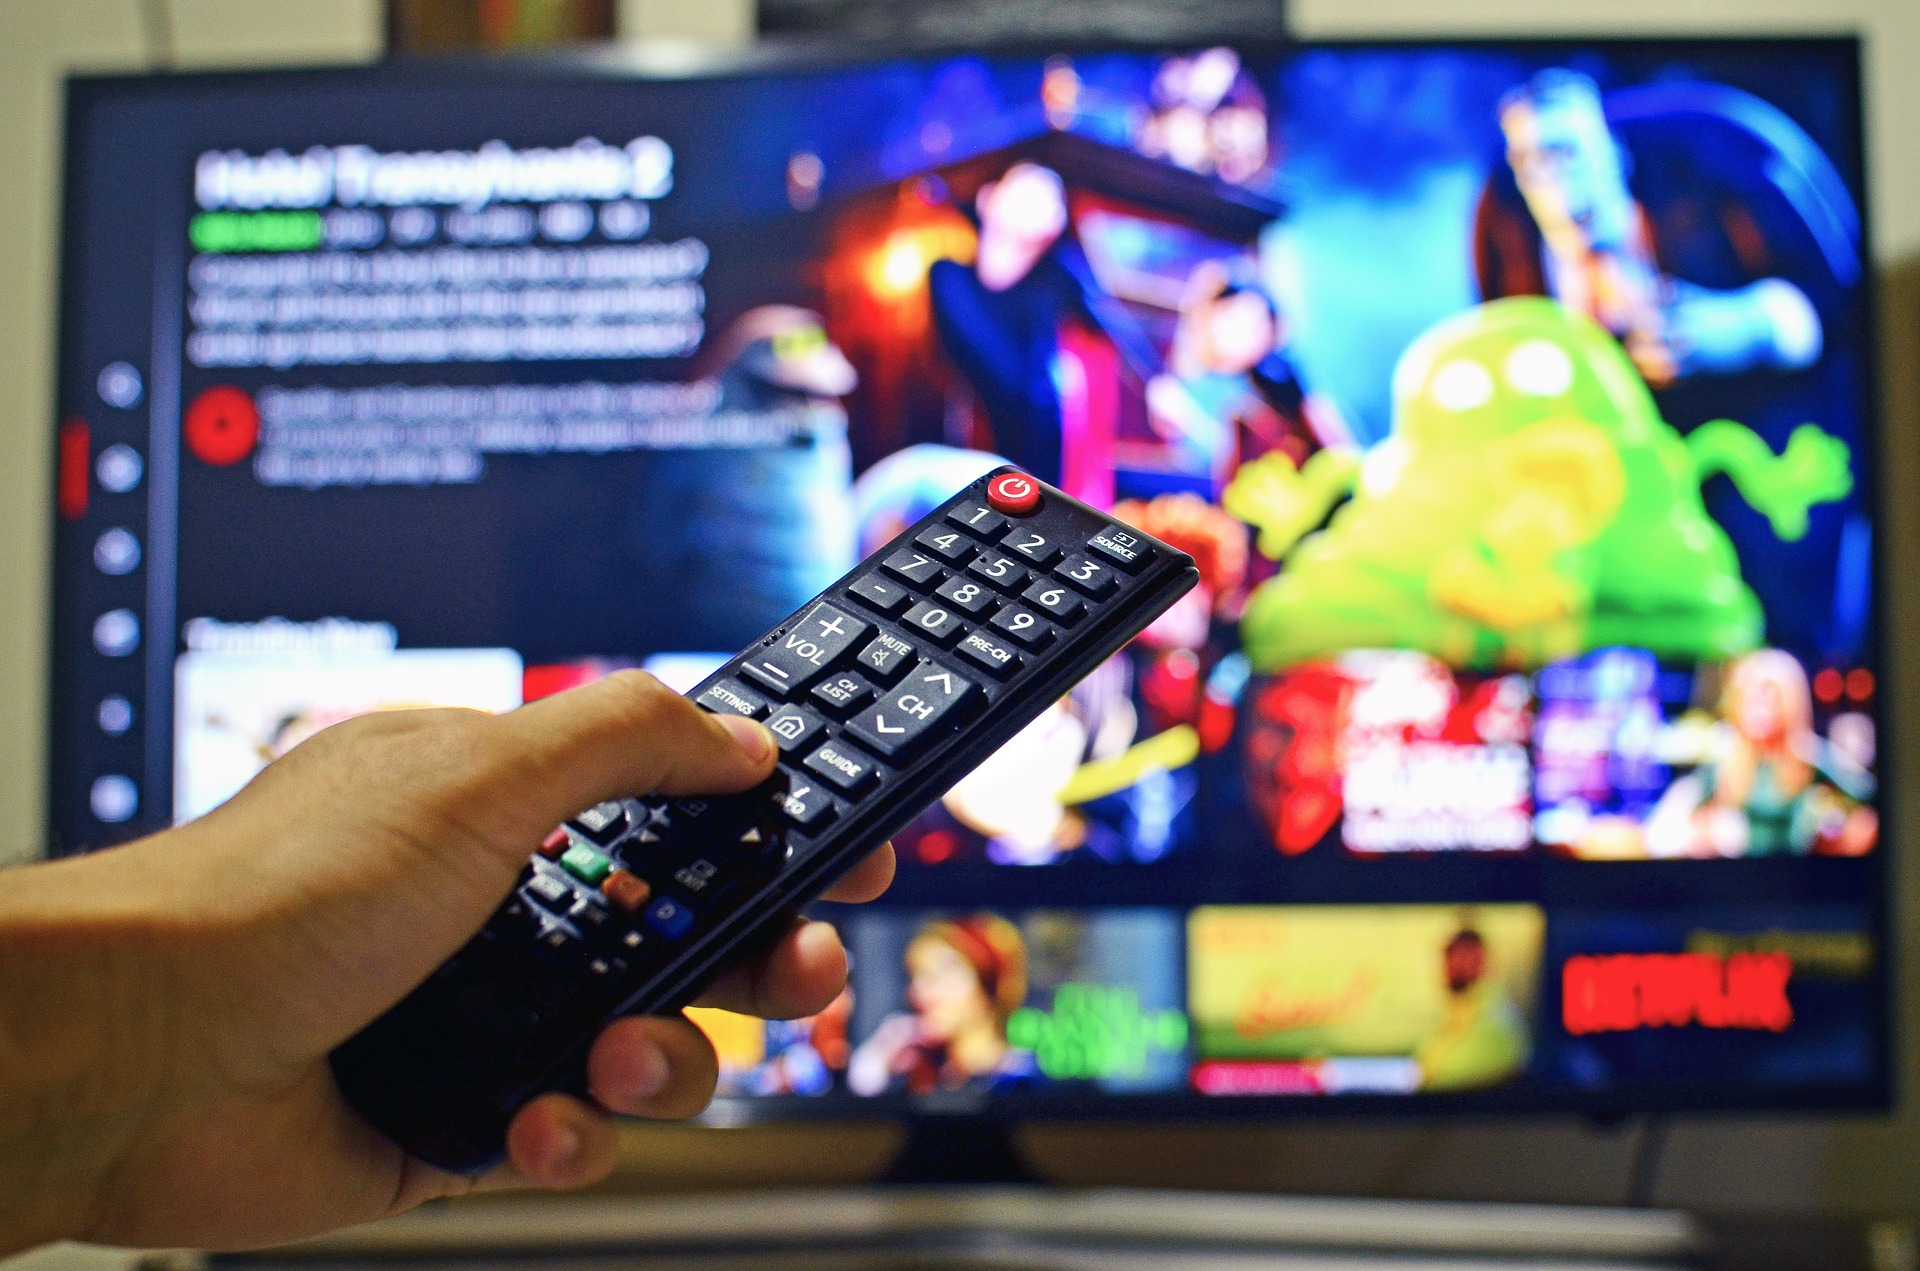 Top 5 TV Apps to Download During Lockdown